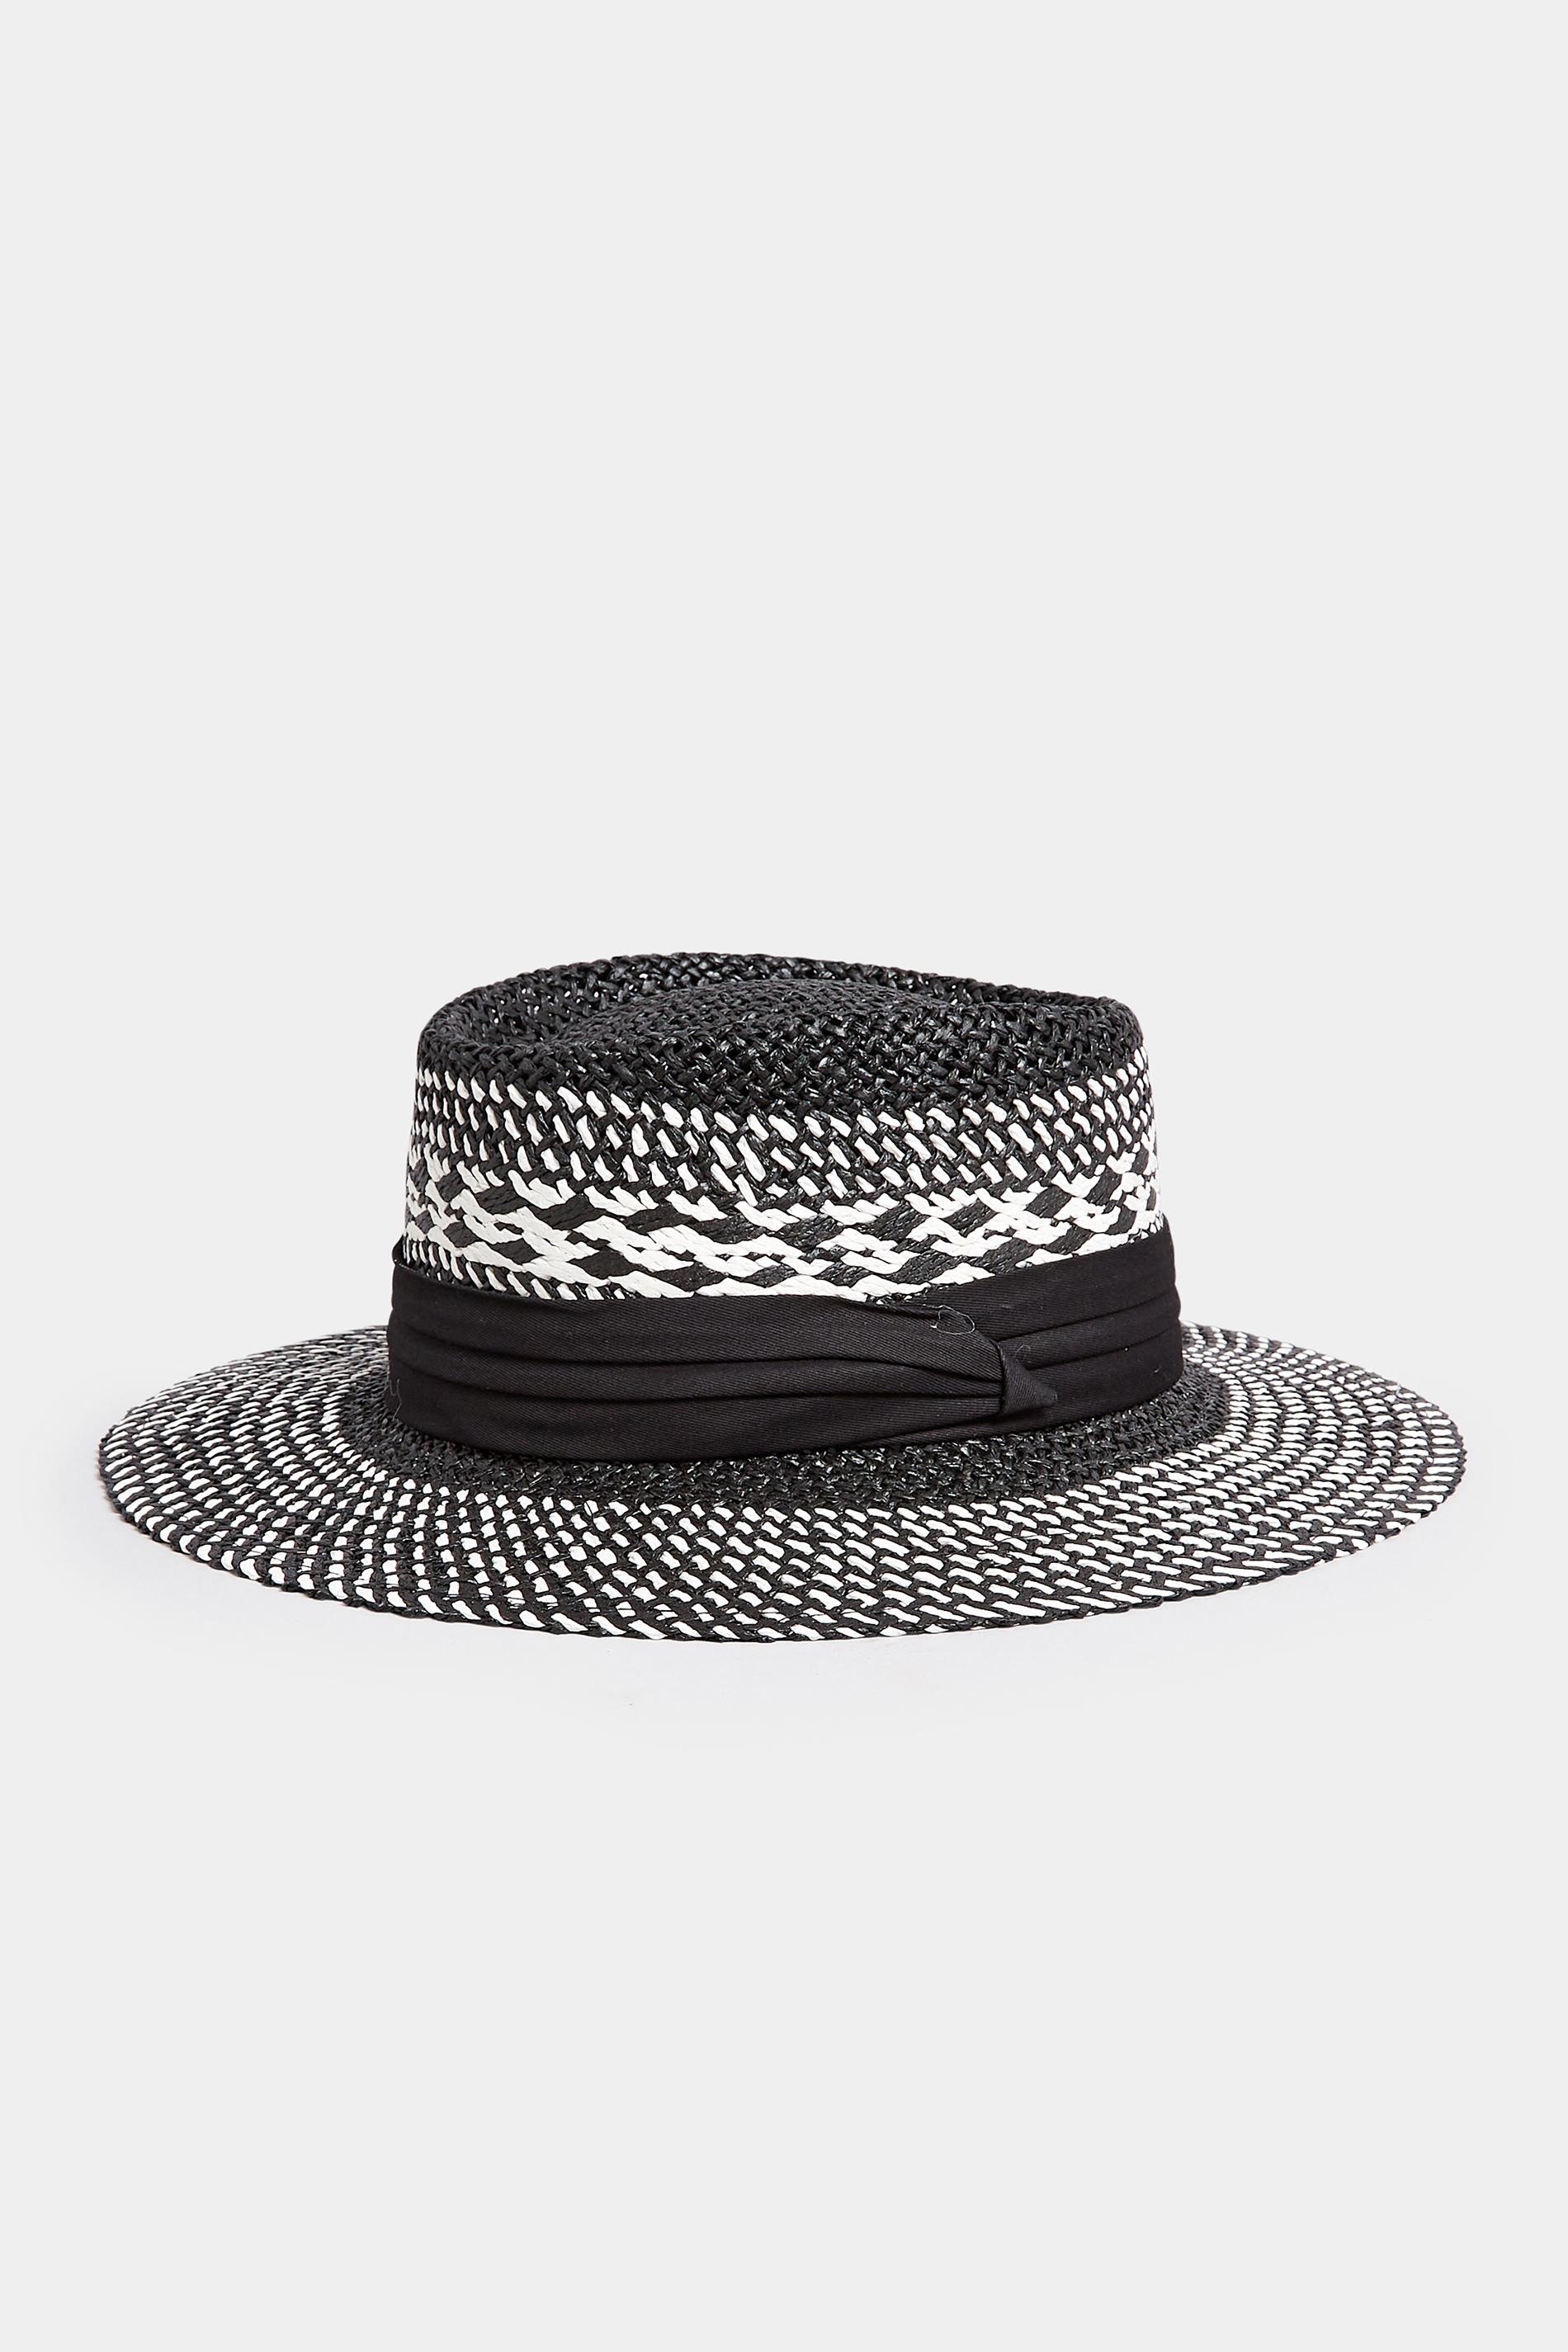 Black & White Contrast Straw Boater Hat | Yours Clothing 2